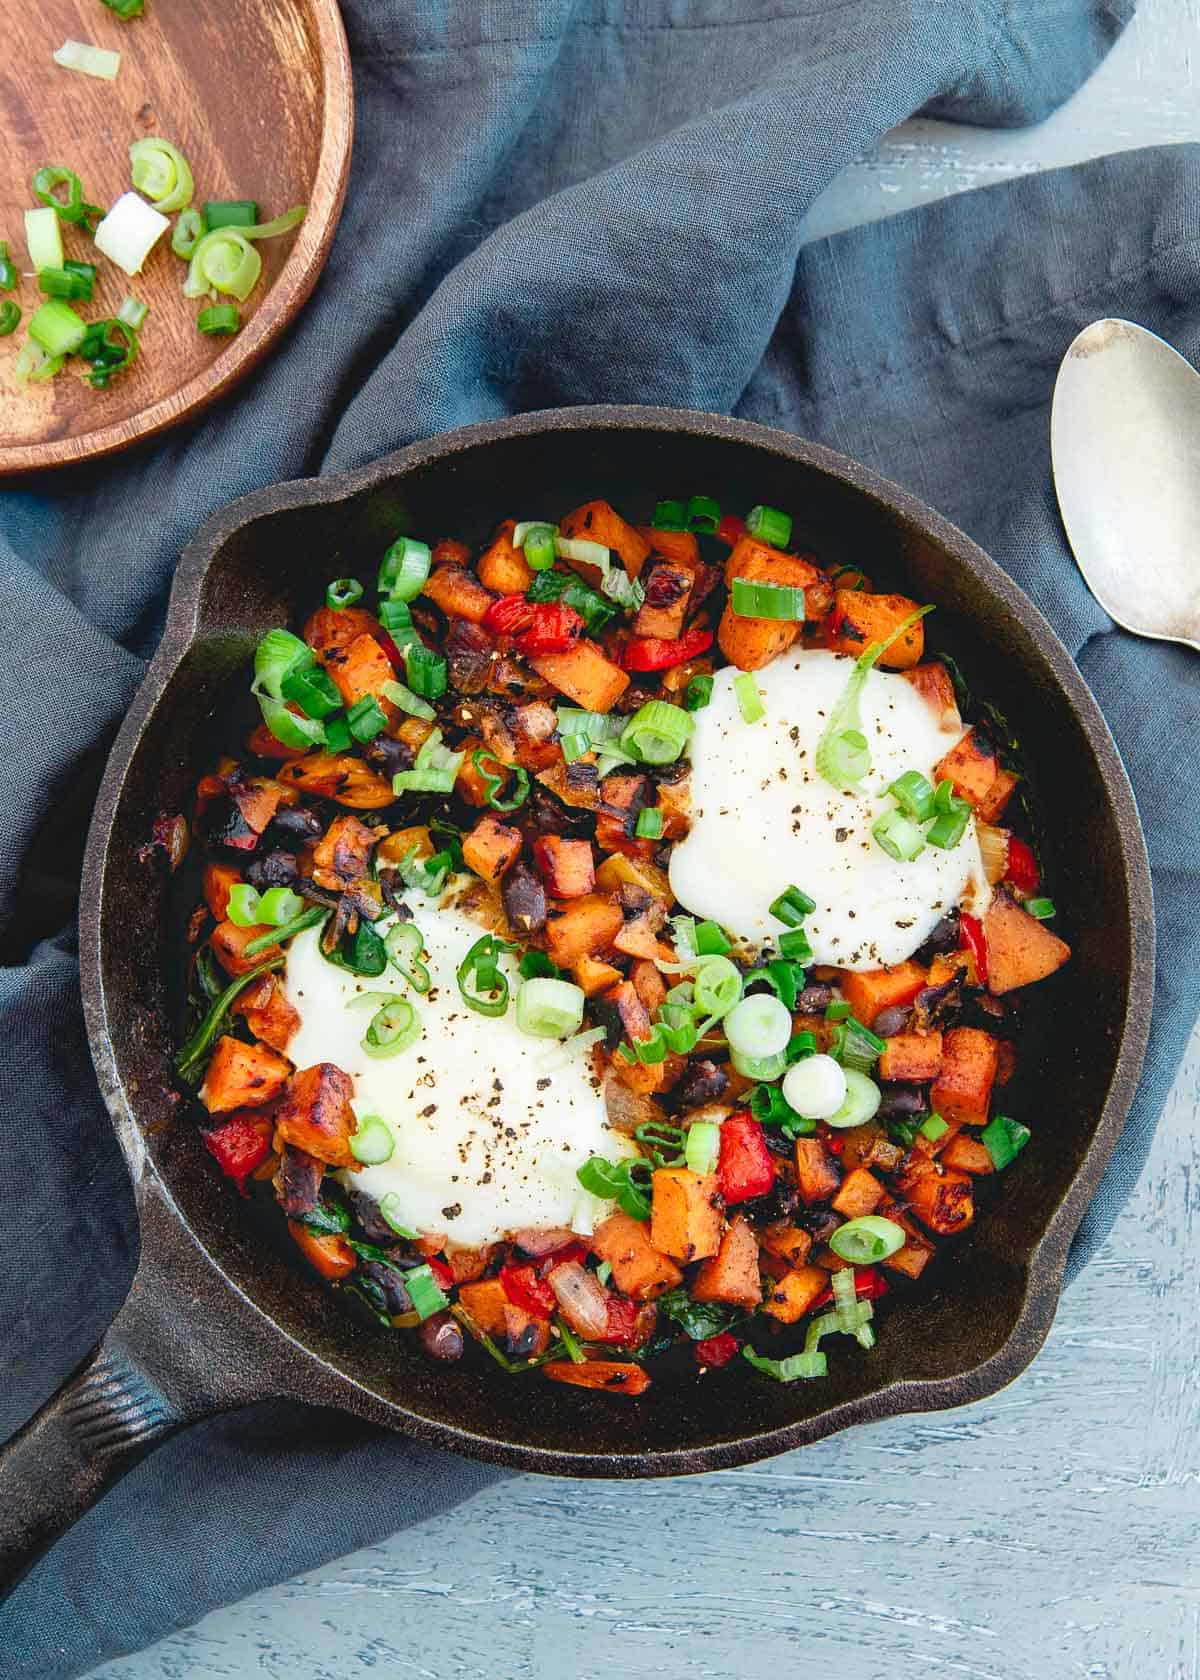 This is a quick Mexican inspired sweet potato hash with a spicy harissa kick. Super simple and makes the perfect breakfast, lunch or dinner!